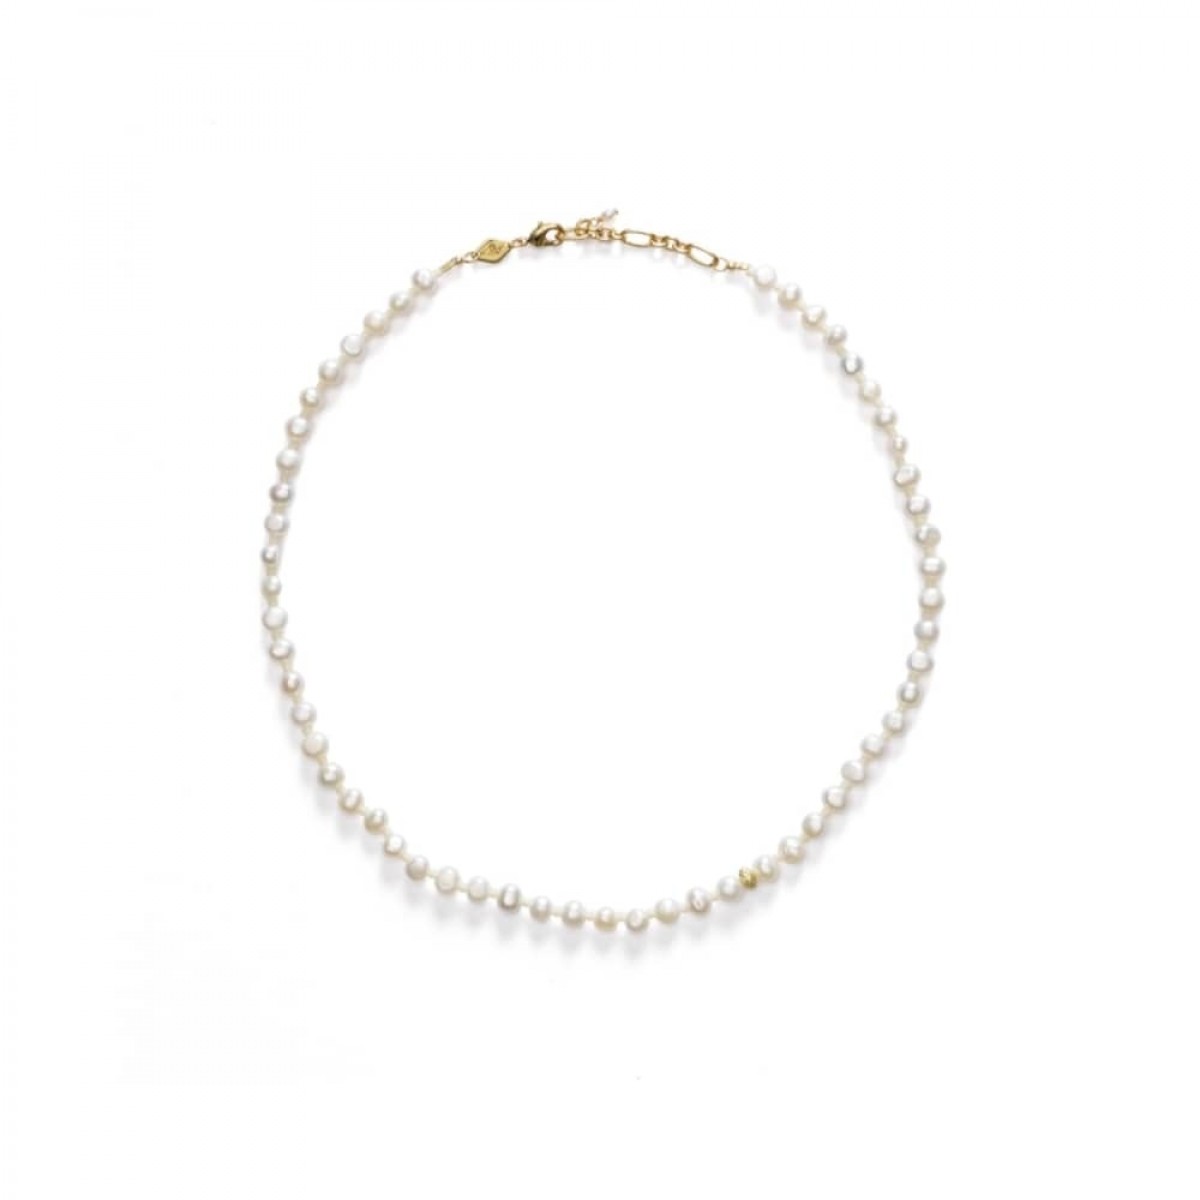 anni lu petit stellar pearly necklace - gold - front